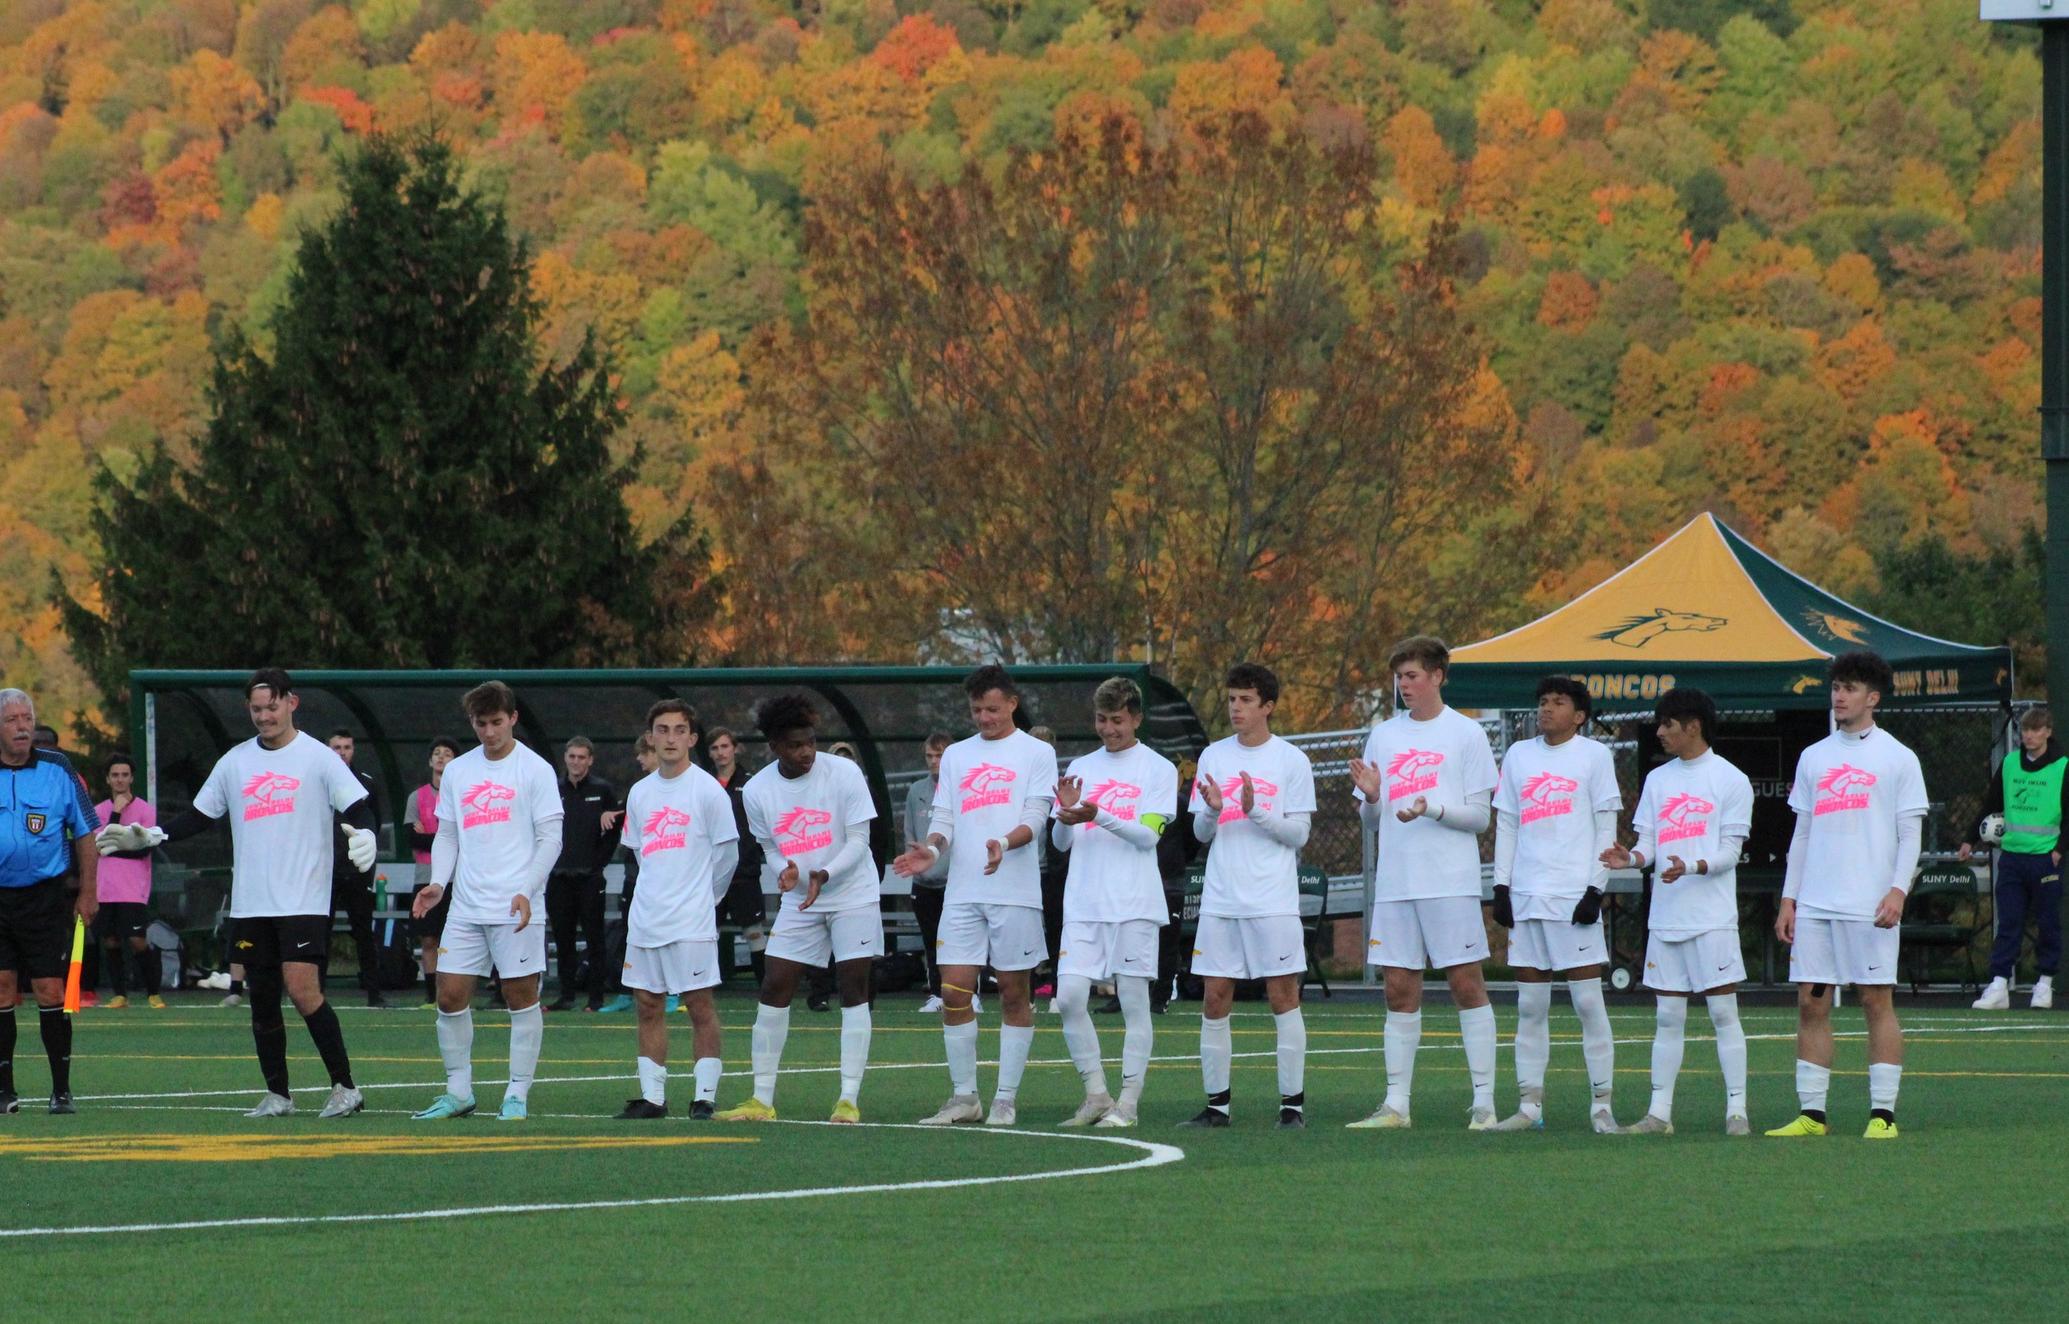 Delhi Takes Care of Business at Home Beating Cobleskill 2-0